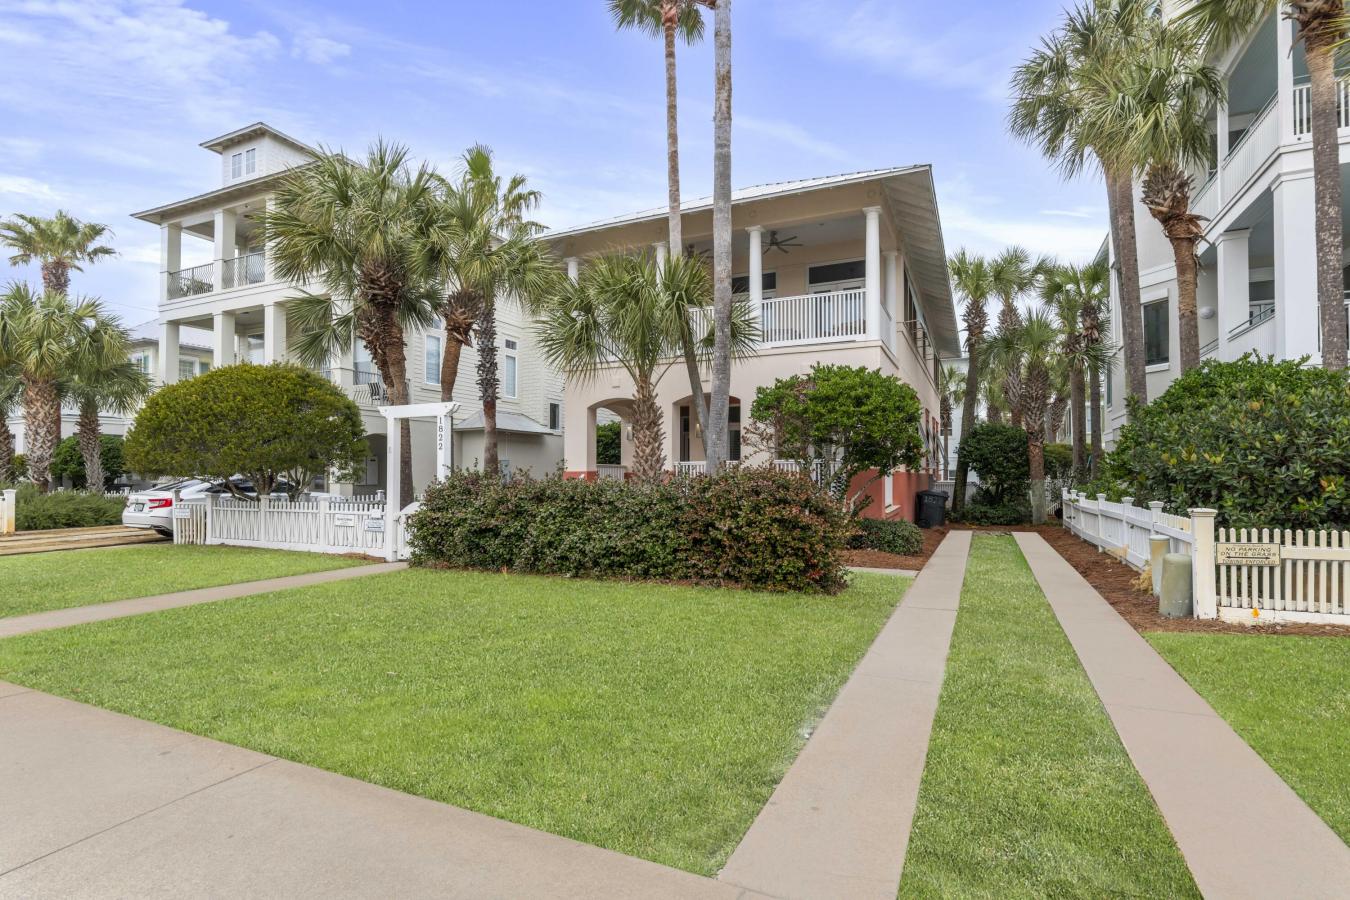 1822 Scenic Gulf Drive, Miramar Beach, Florida, 32550, United States, 4 Bedrooms Bedrooms, ,1 BathroomBathrooms,Residential,For Sale,1822 Scenic Gulf Drive,1468113